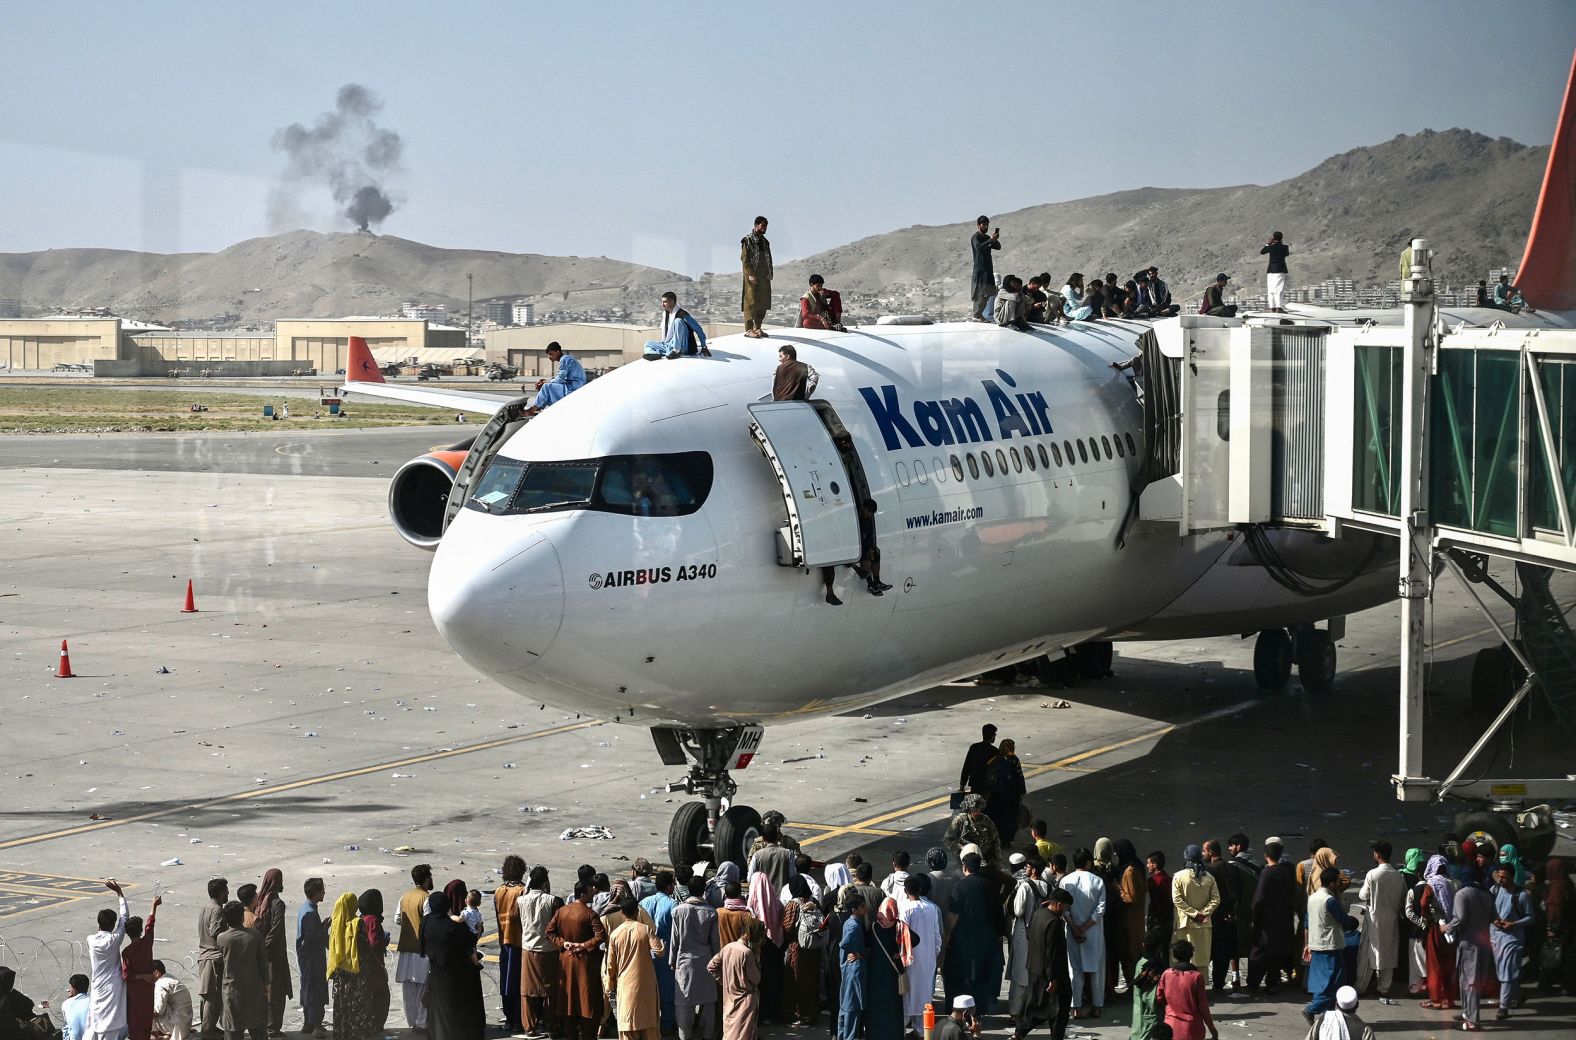 People climb atop a plane at Kabul's international airport after the Taliban retook the capital a day earlier. Hundreds of people<a href="index.php?page=&url=https%3A%2F%2Fwww.cnn.com%2F2021%2F08%2F16%2Fmiddleeast%2Fkabul-afghanistan-withdrawal-taliban-intl%2Findex.html" target="_blank"> </a>poured onto the tarmac, <a href="index.php?page=&url=https%3A%2F%2Fwww.cnn.com%2F2021%2F08%2F16%2Fmiddleeast%2Fkabul-afghanistan-withdrawal-taliban-intl%2Findex.html" target="_blank">desperately seeking a route out of Afghanistan.</a>